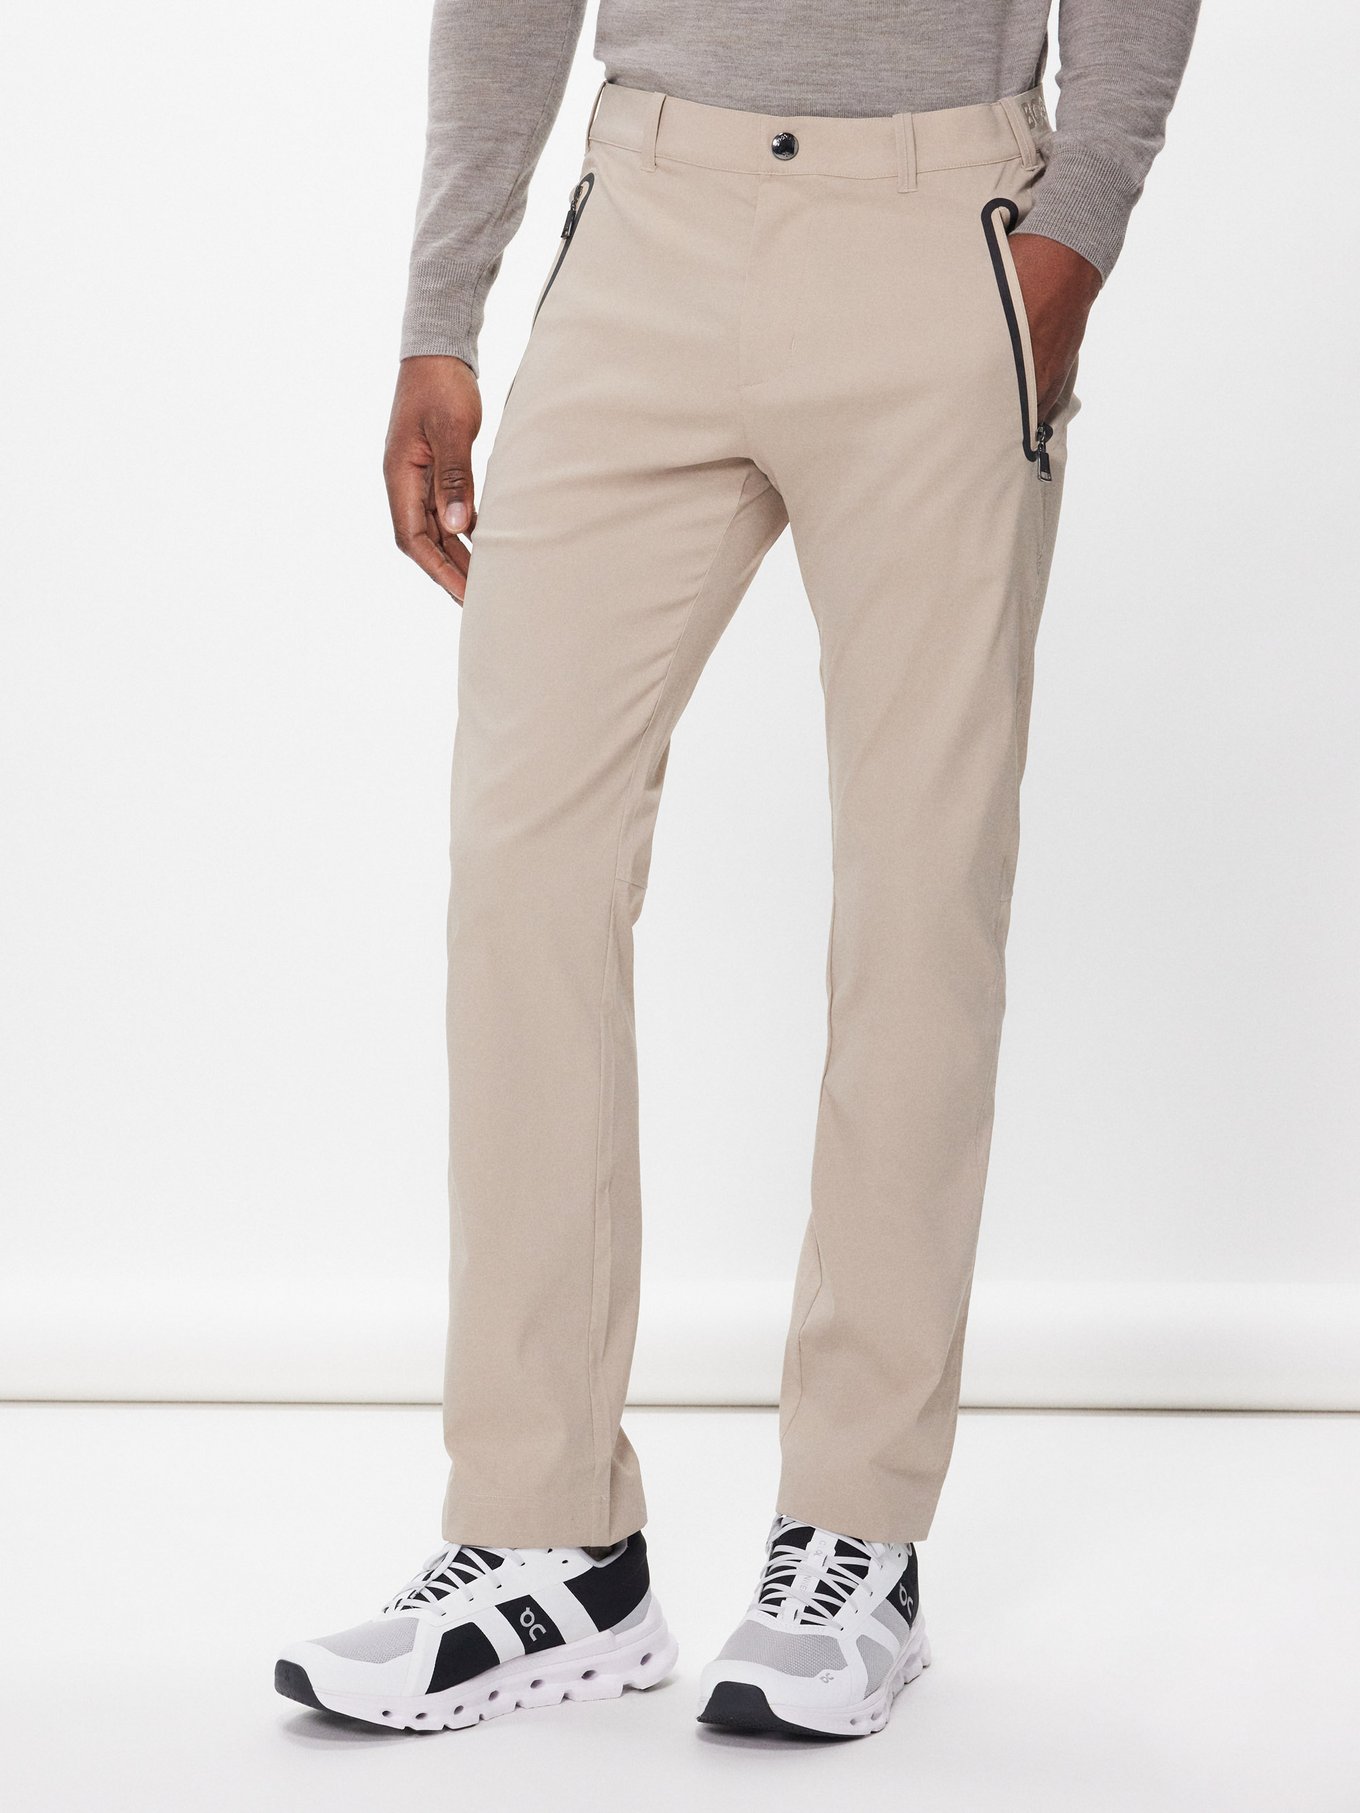 Water Resistant Golf Trousers | tca.dothome.co.kr